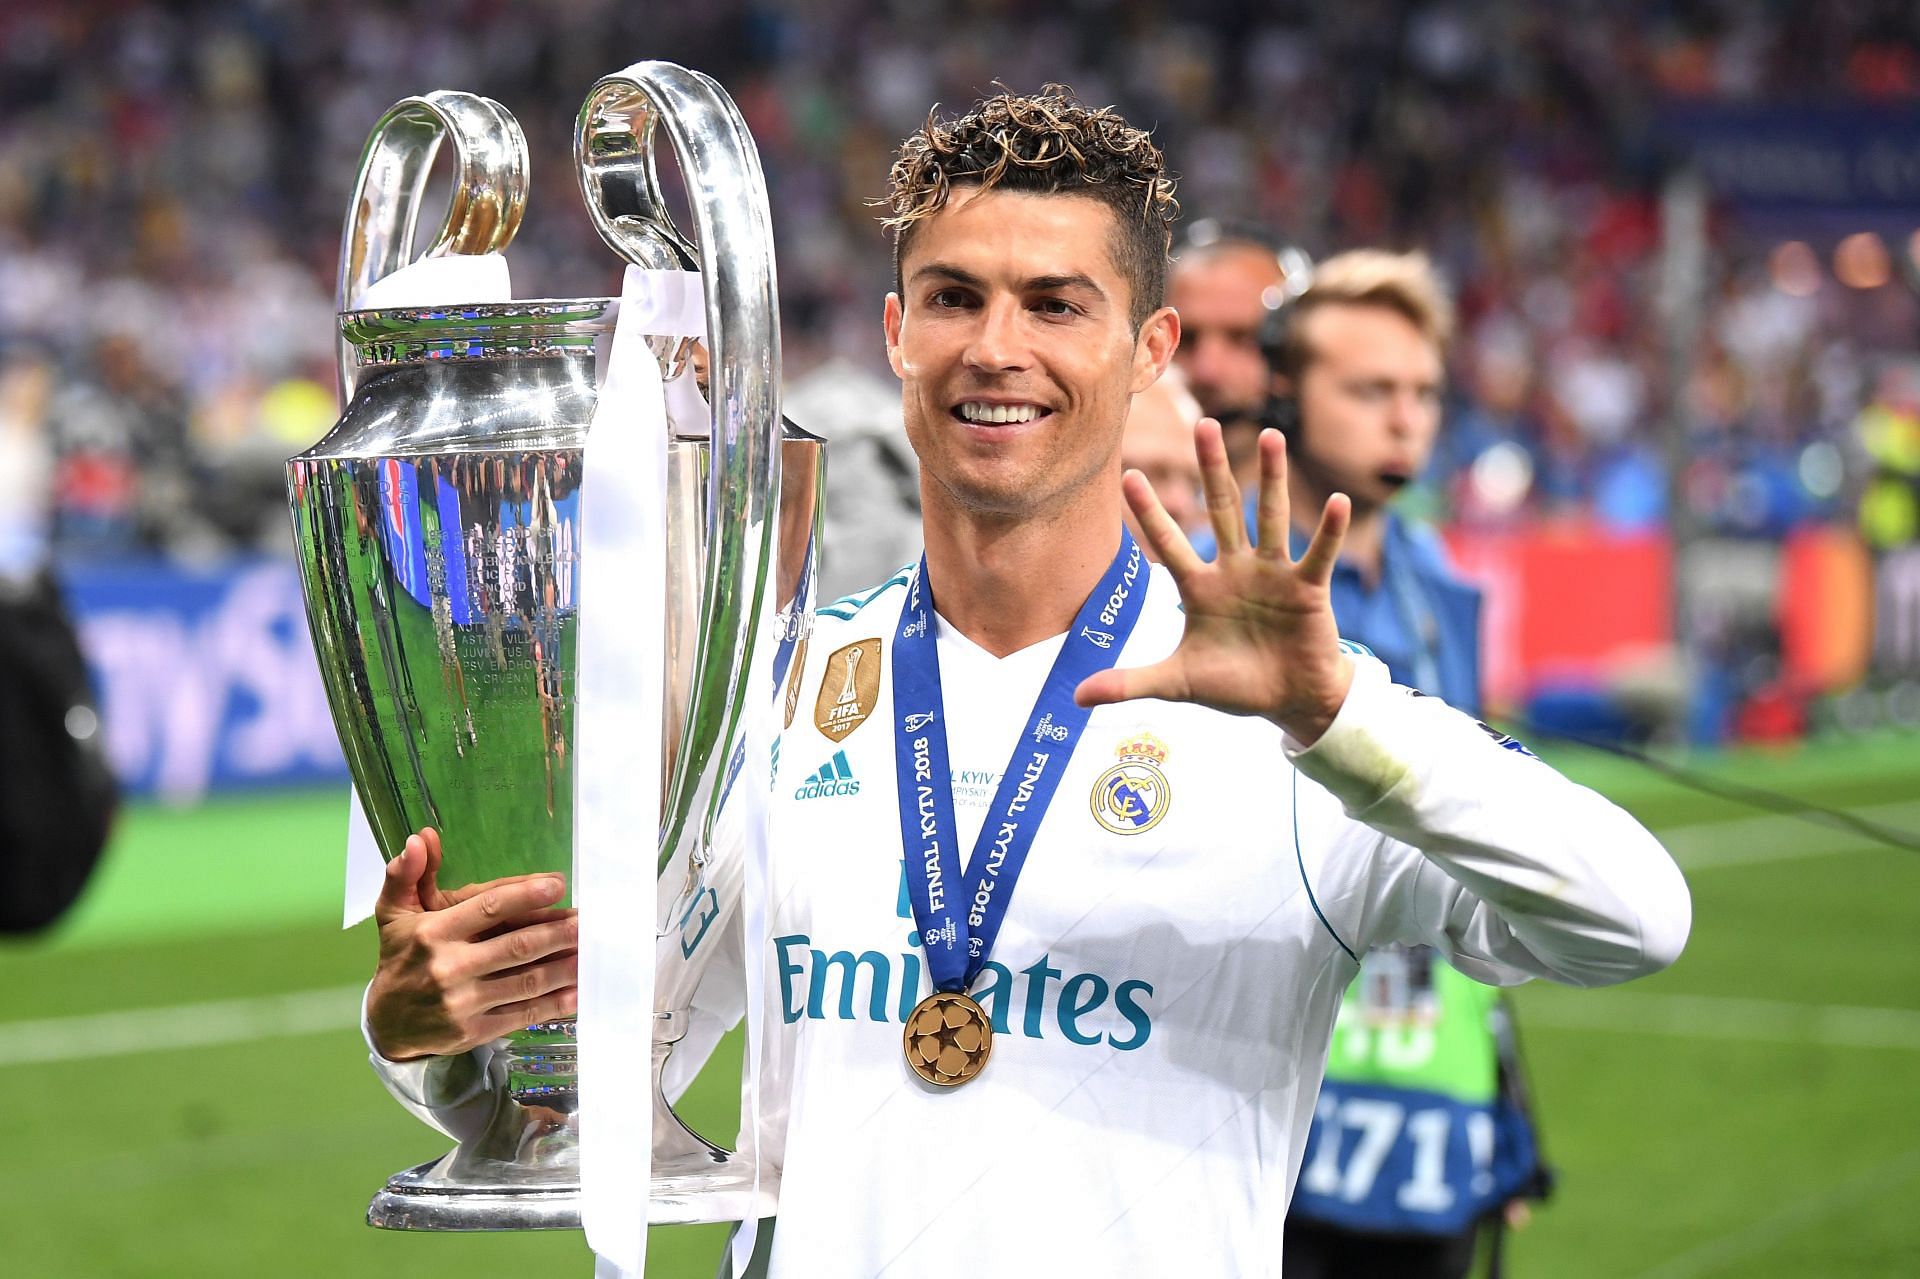 Cristiano Ronaldo put in the hard work to reach the top of world football.